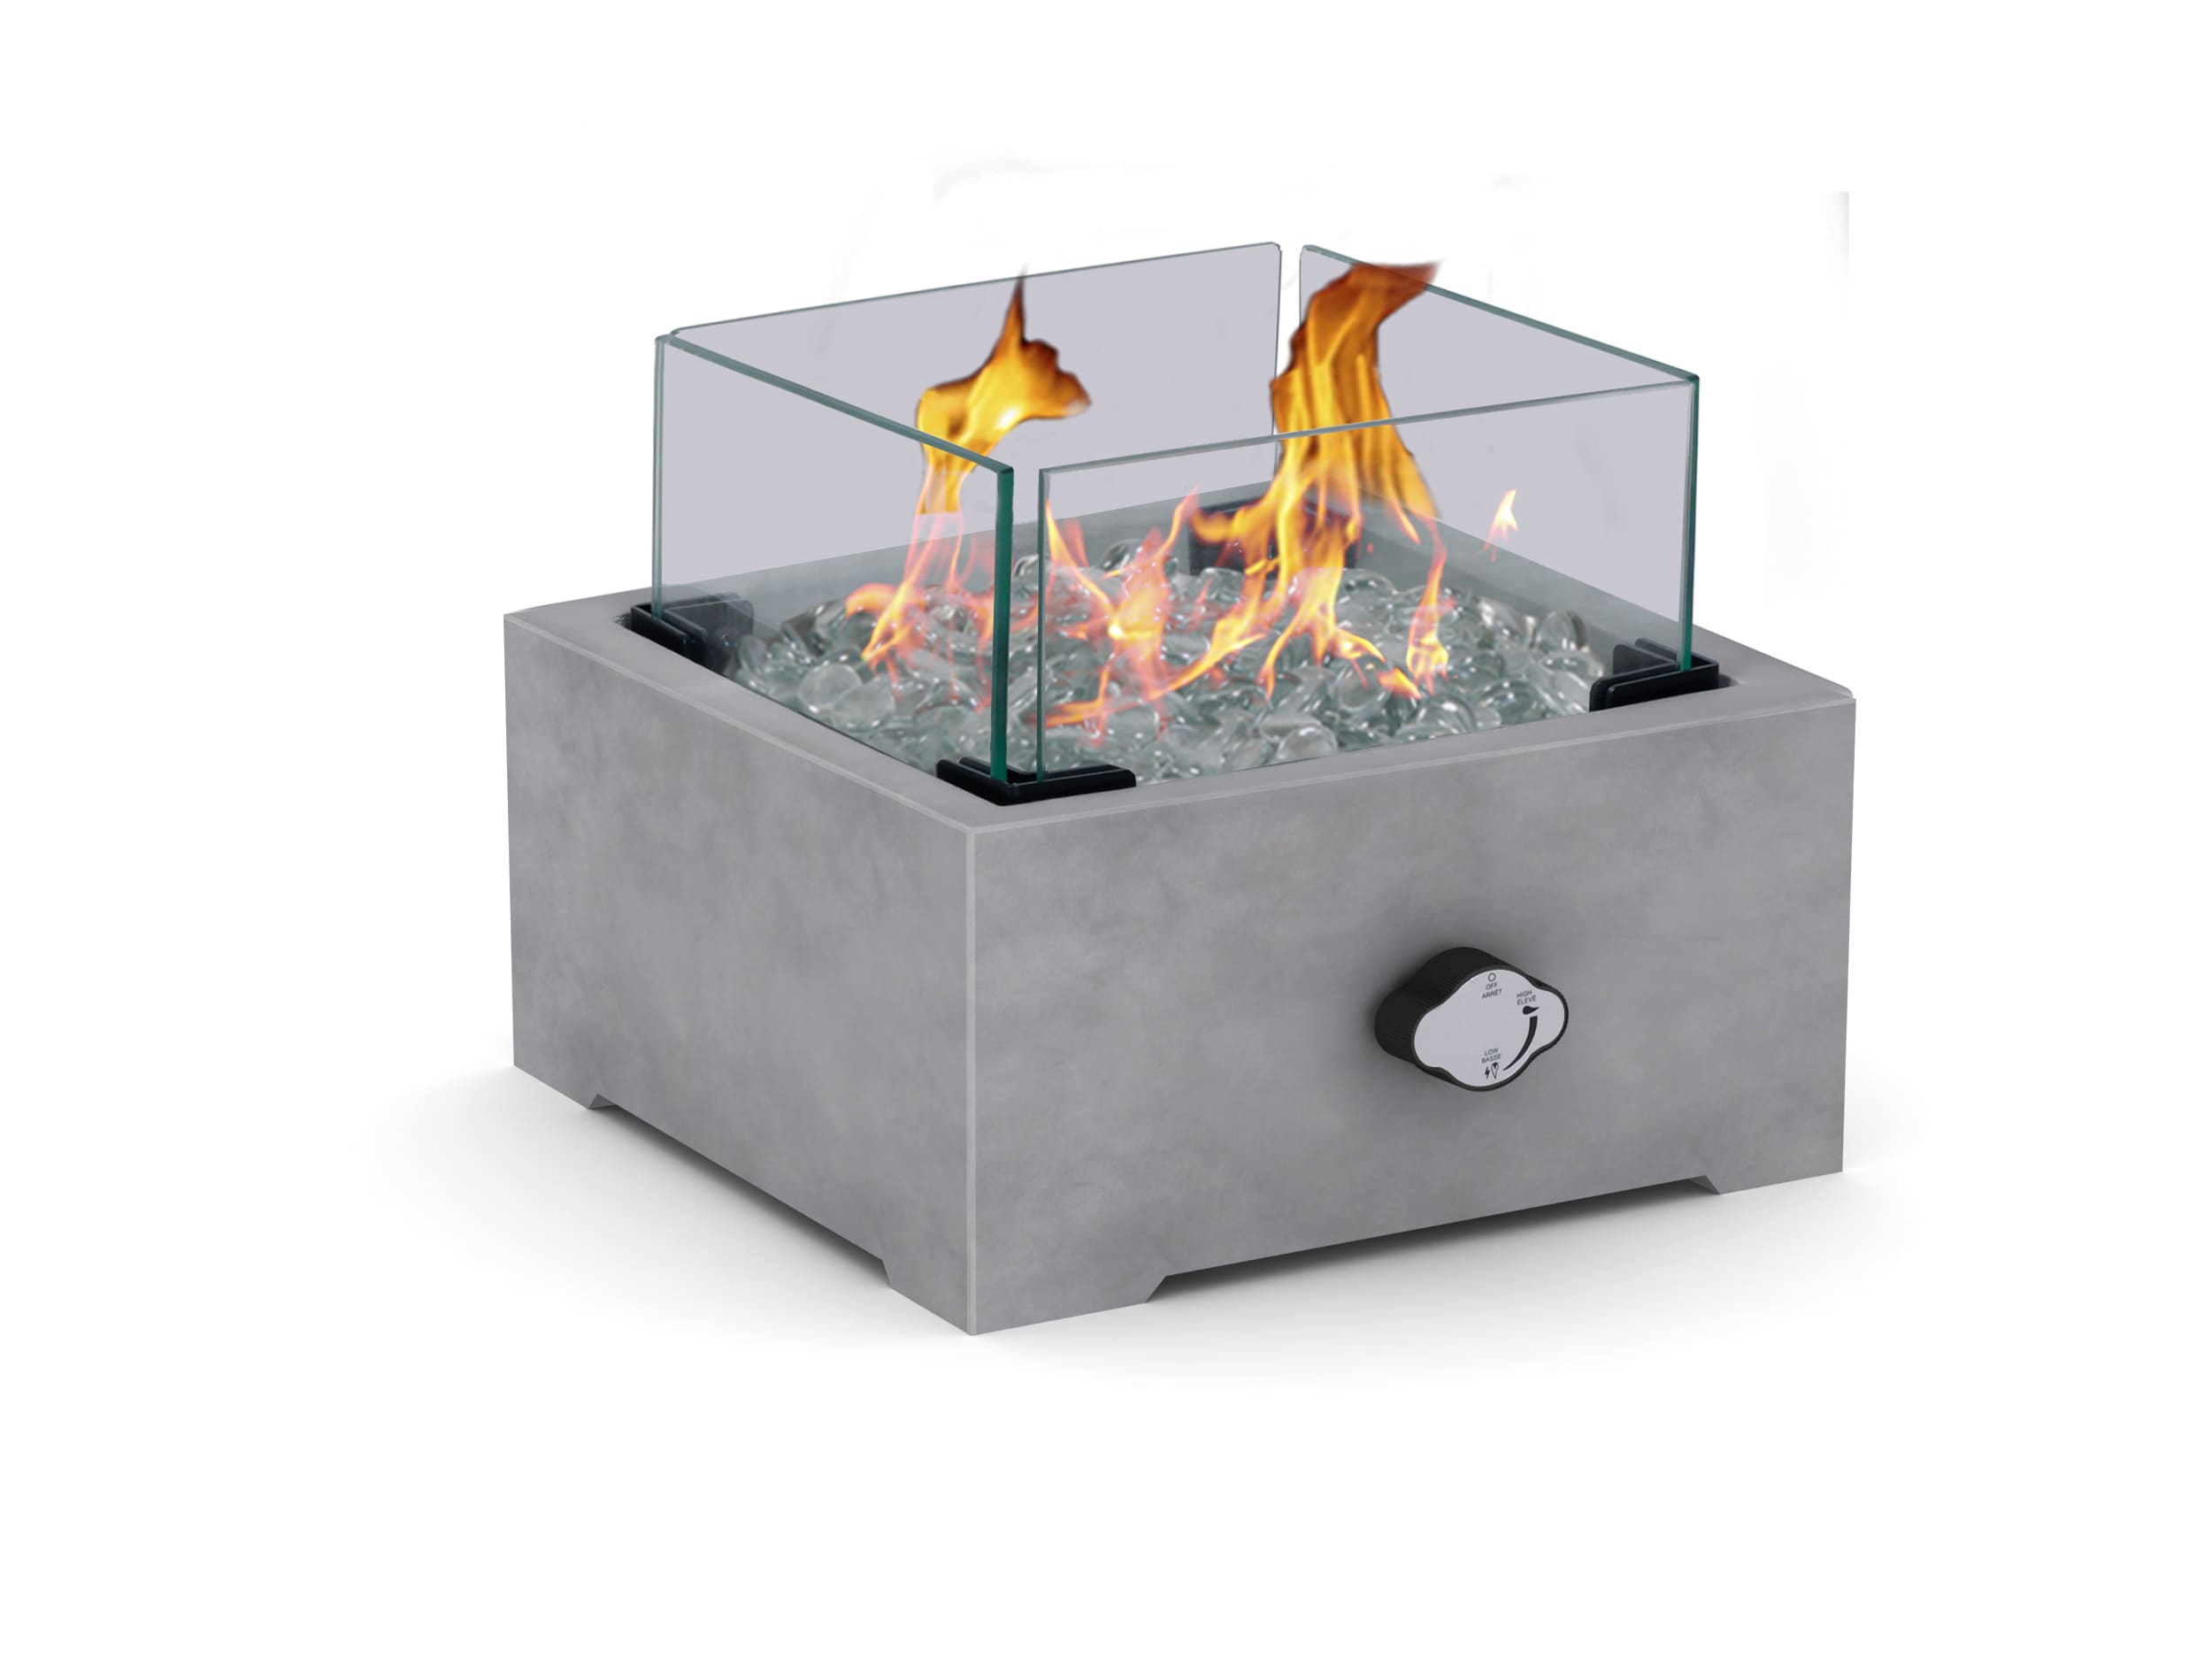 Table top Heater Metal Patio Fire Pit Gas Ventless Bowl Indoor/Outdoor Small NEW 